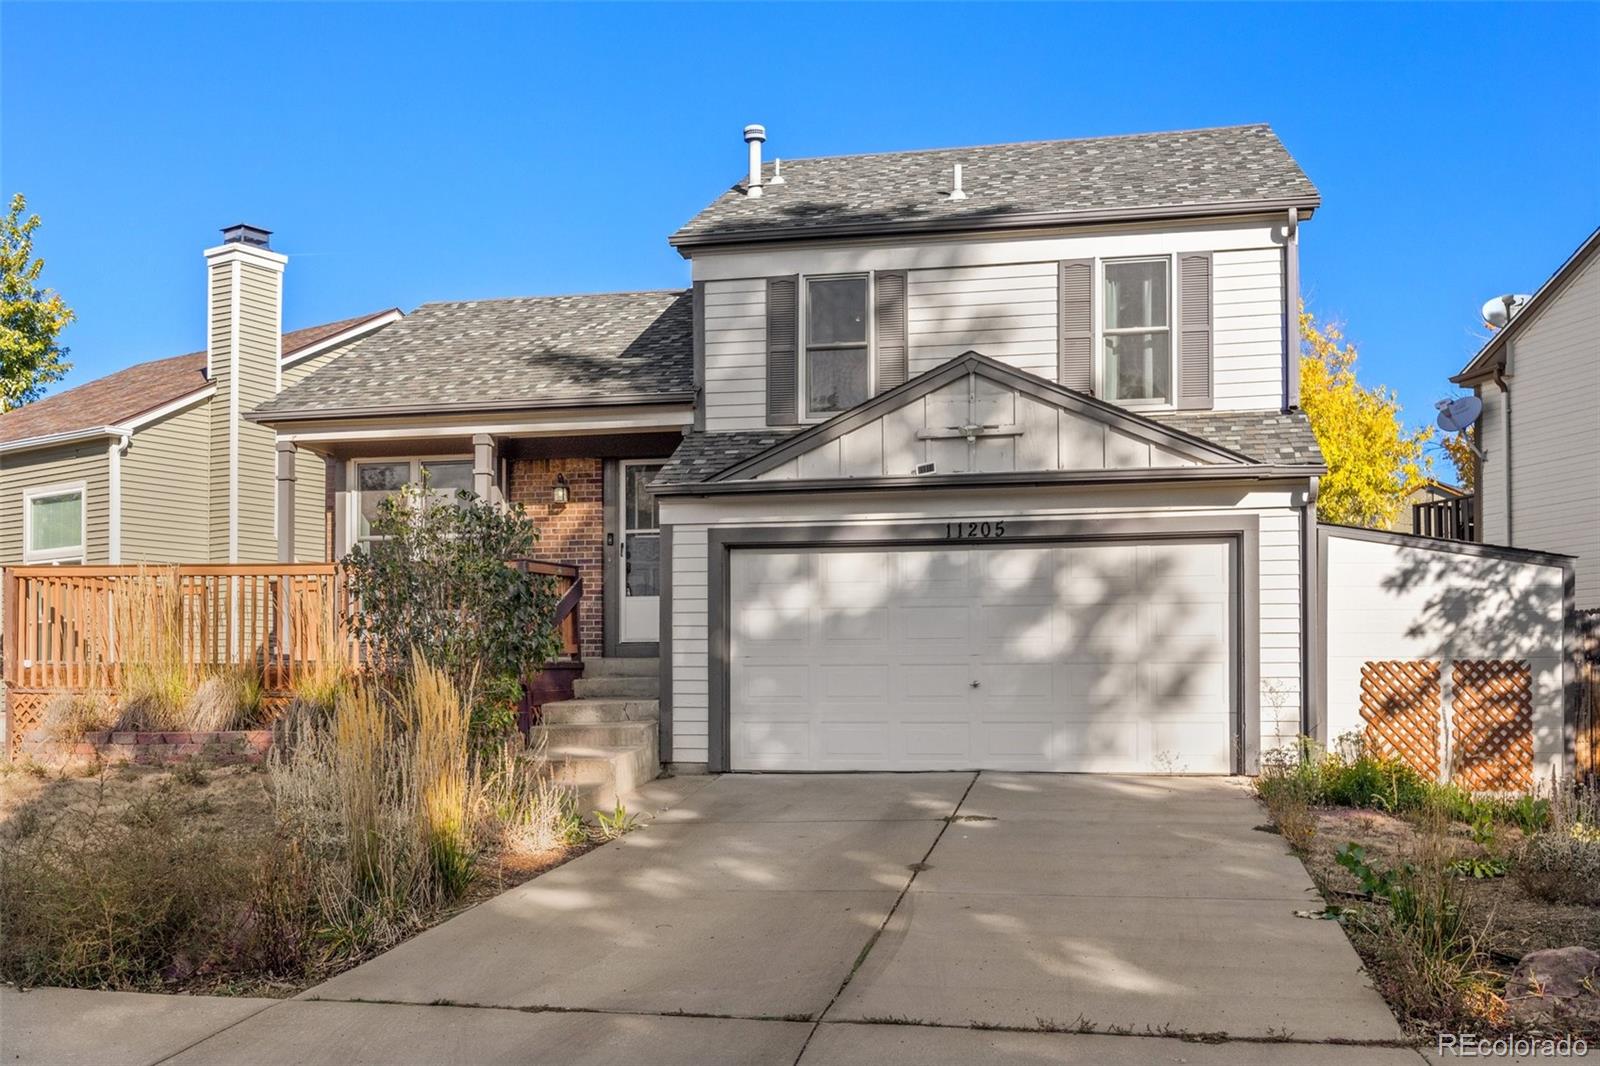 Report Image for 11205 W 102nd Place,Westminster, Colorado